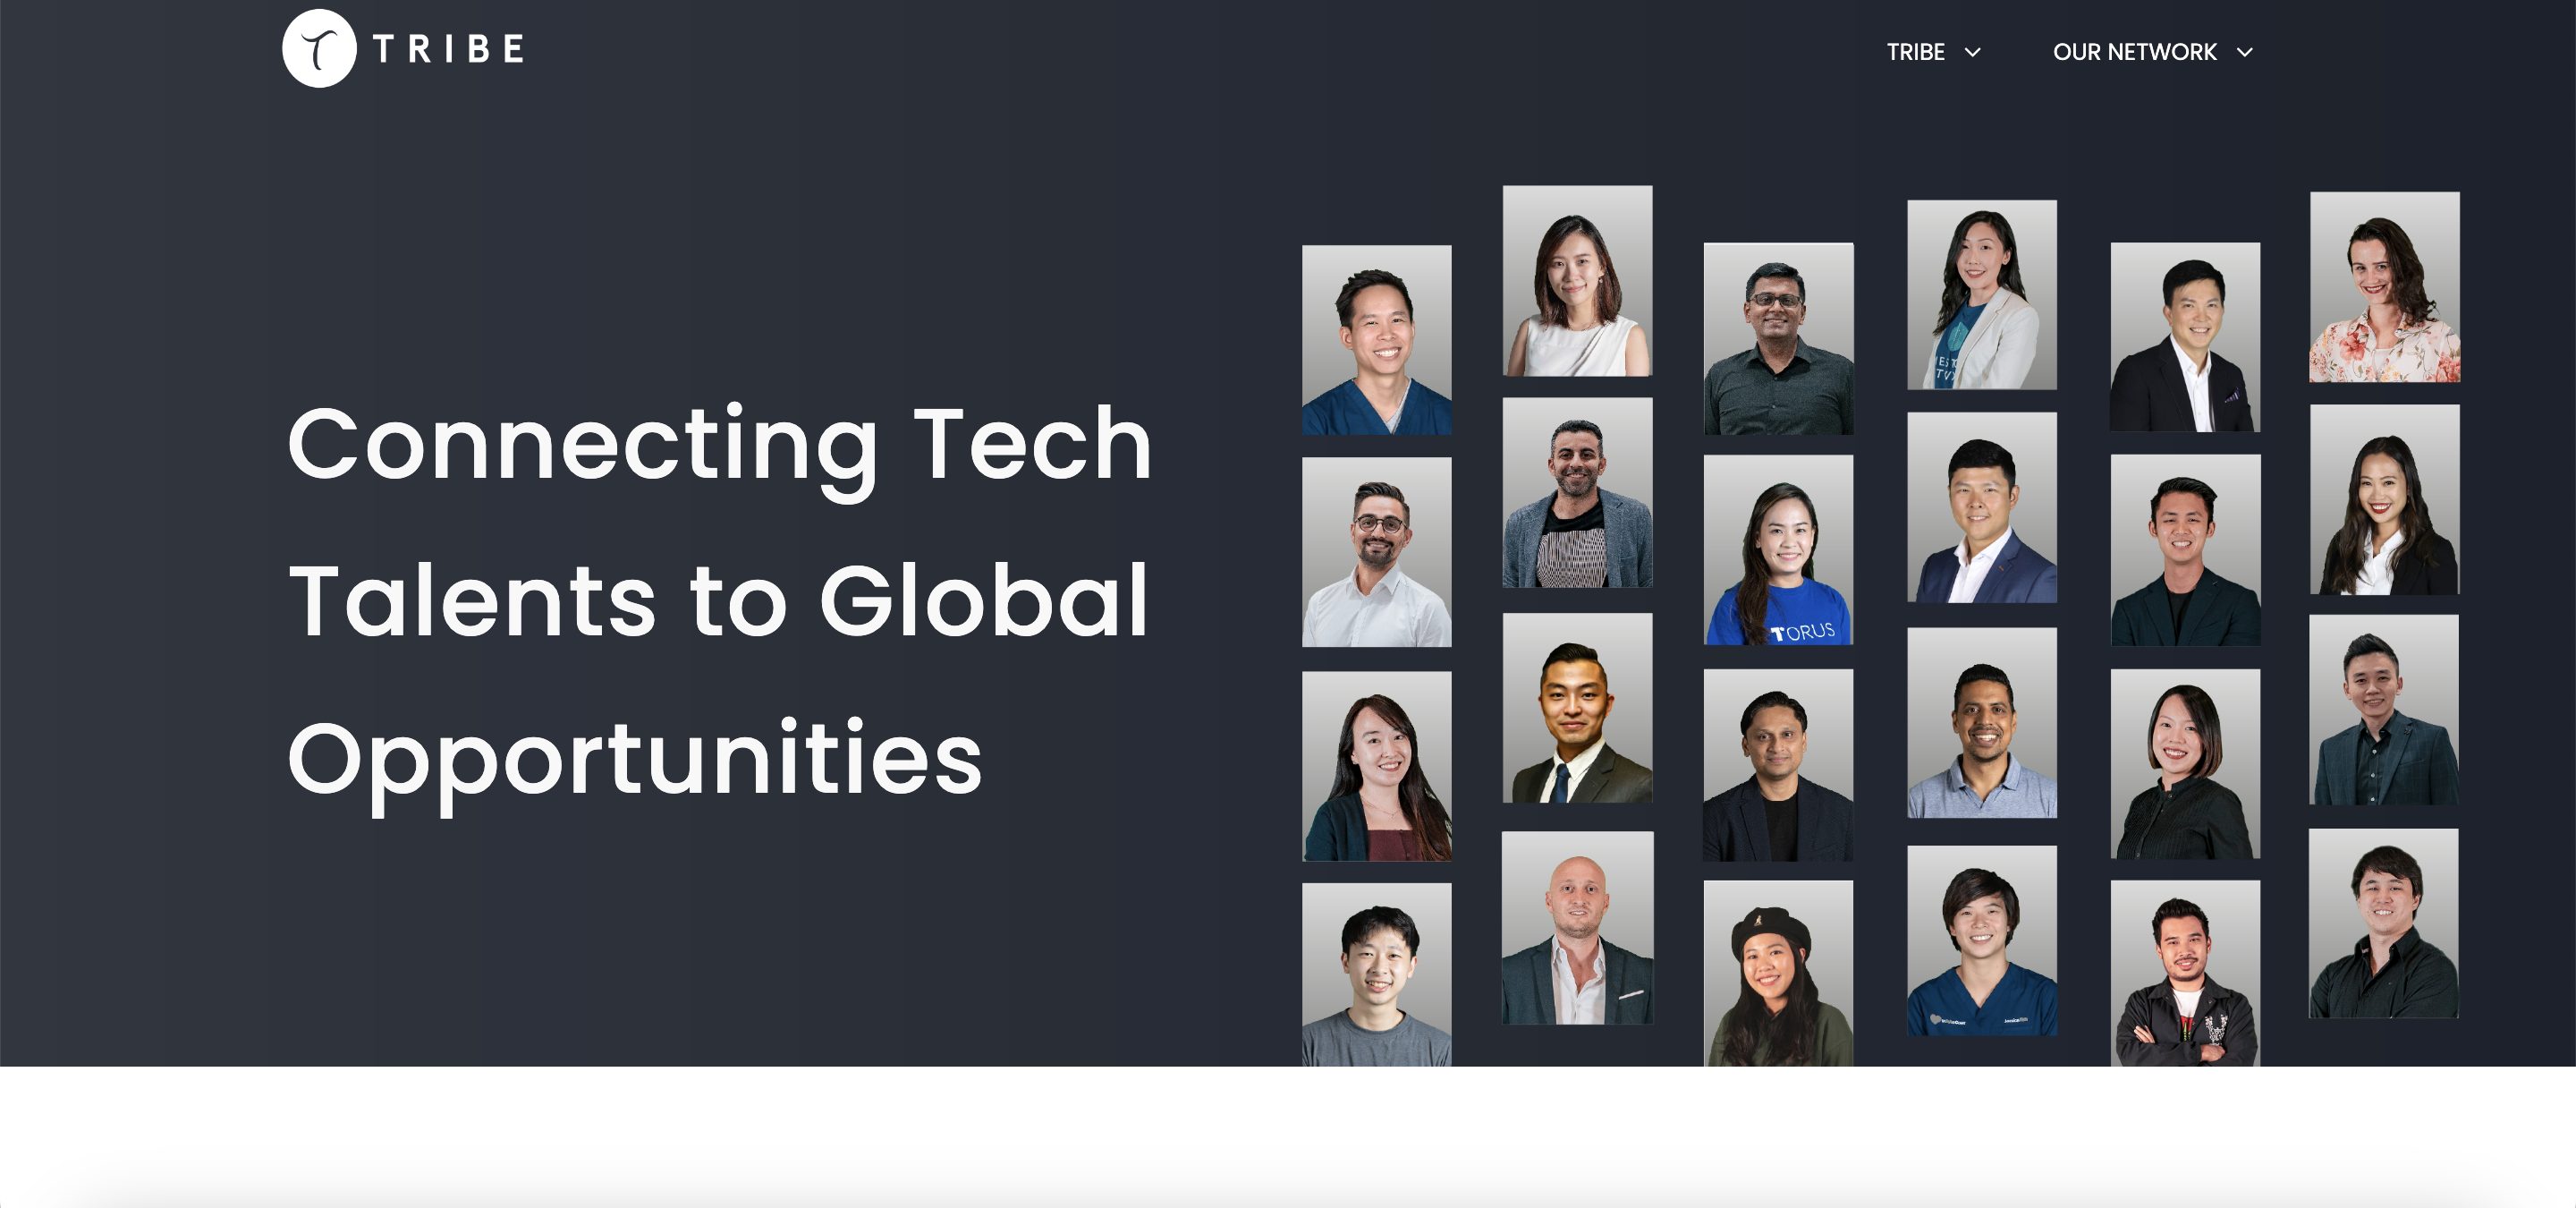 Connecting Tech Talents to Global Opportunities